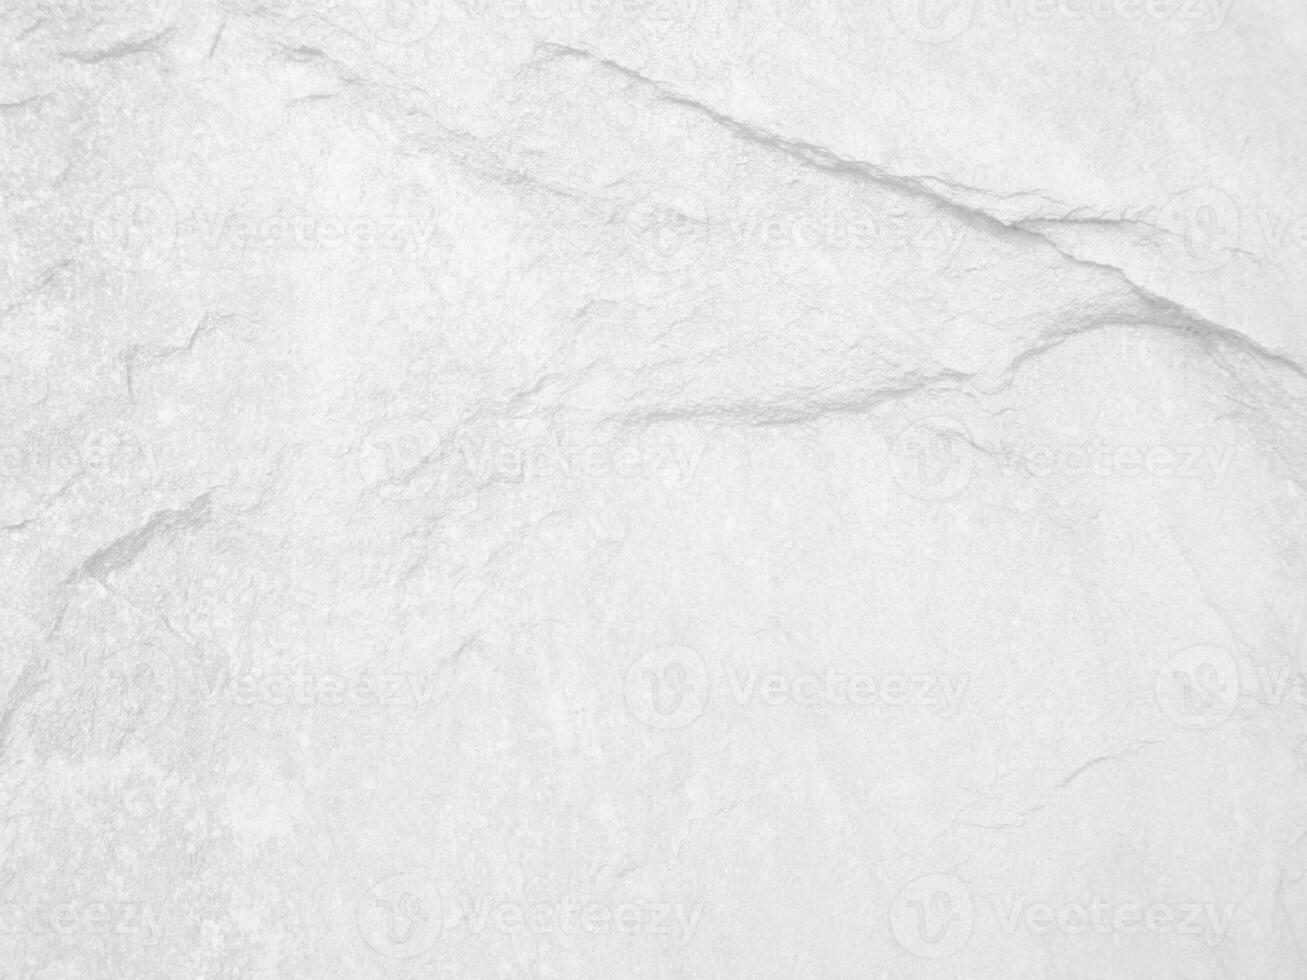 Surface of the White stone texture rough, gray-white tone. Use this for wallpaper or background image. There is a blank space for text photo